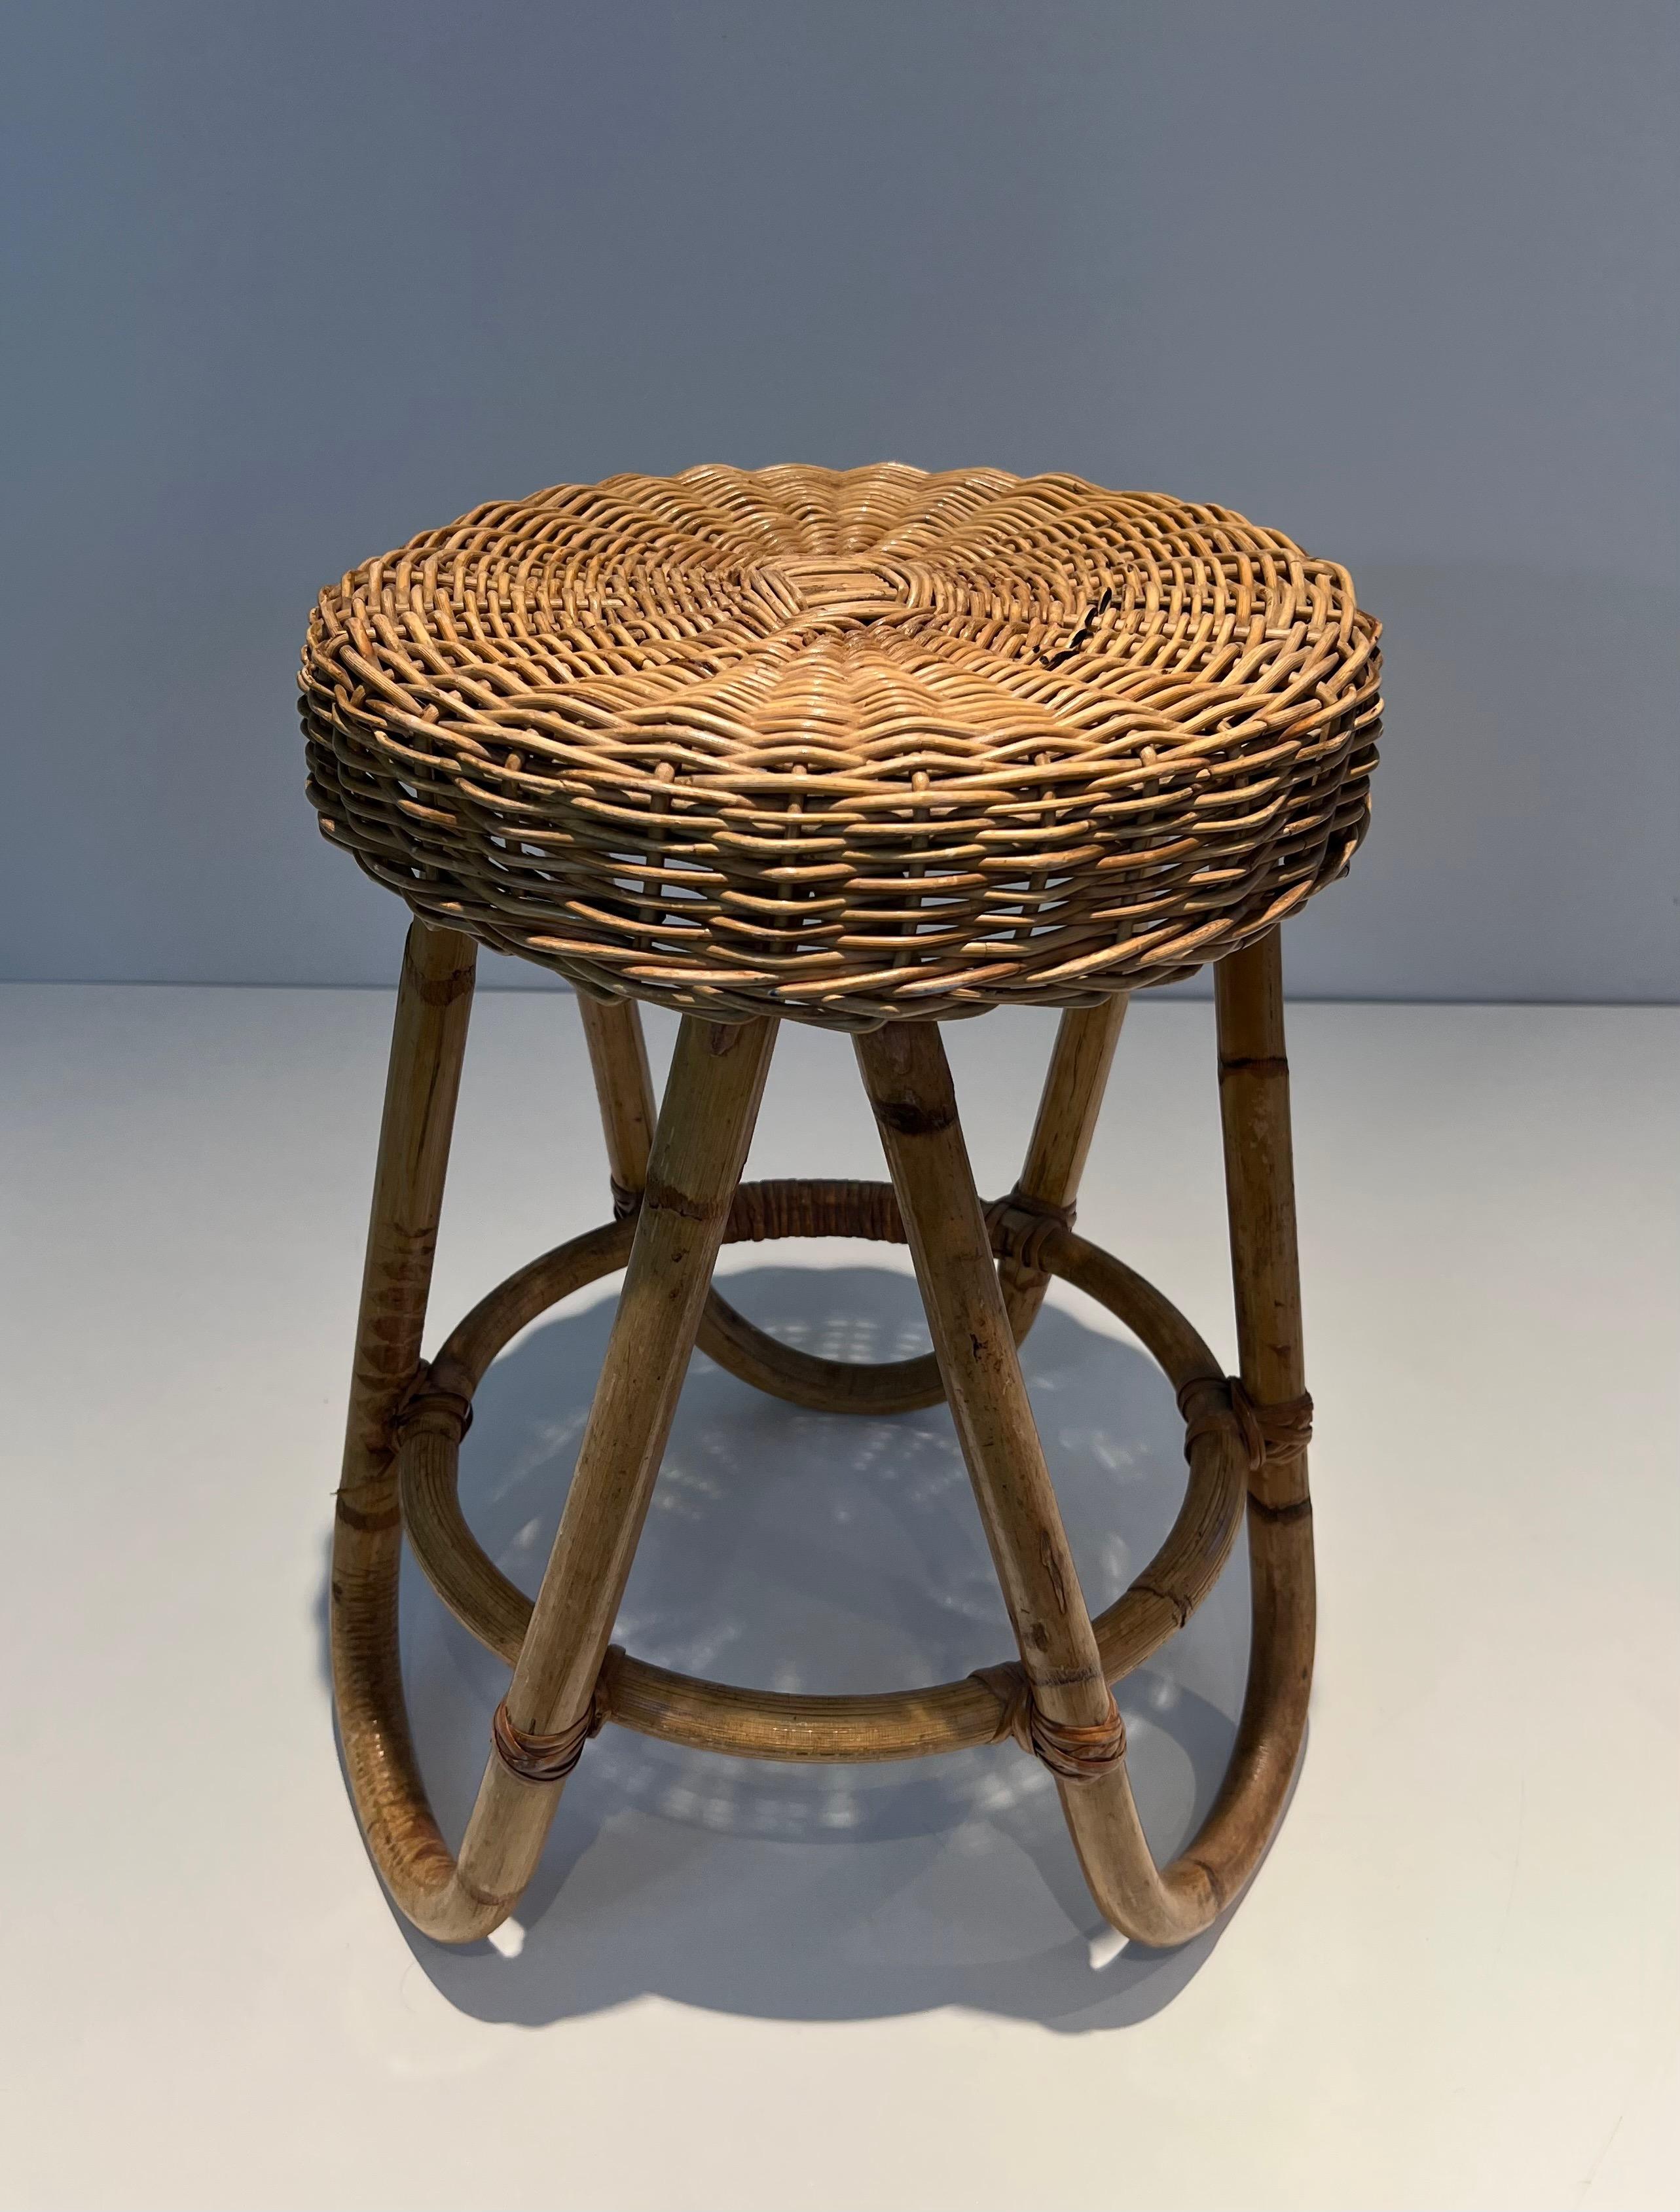 This very nice and unusual stool is made of rattan. This is a French work. Circa 1950